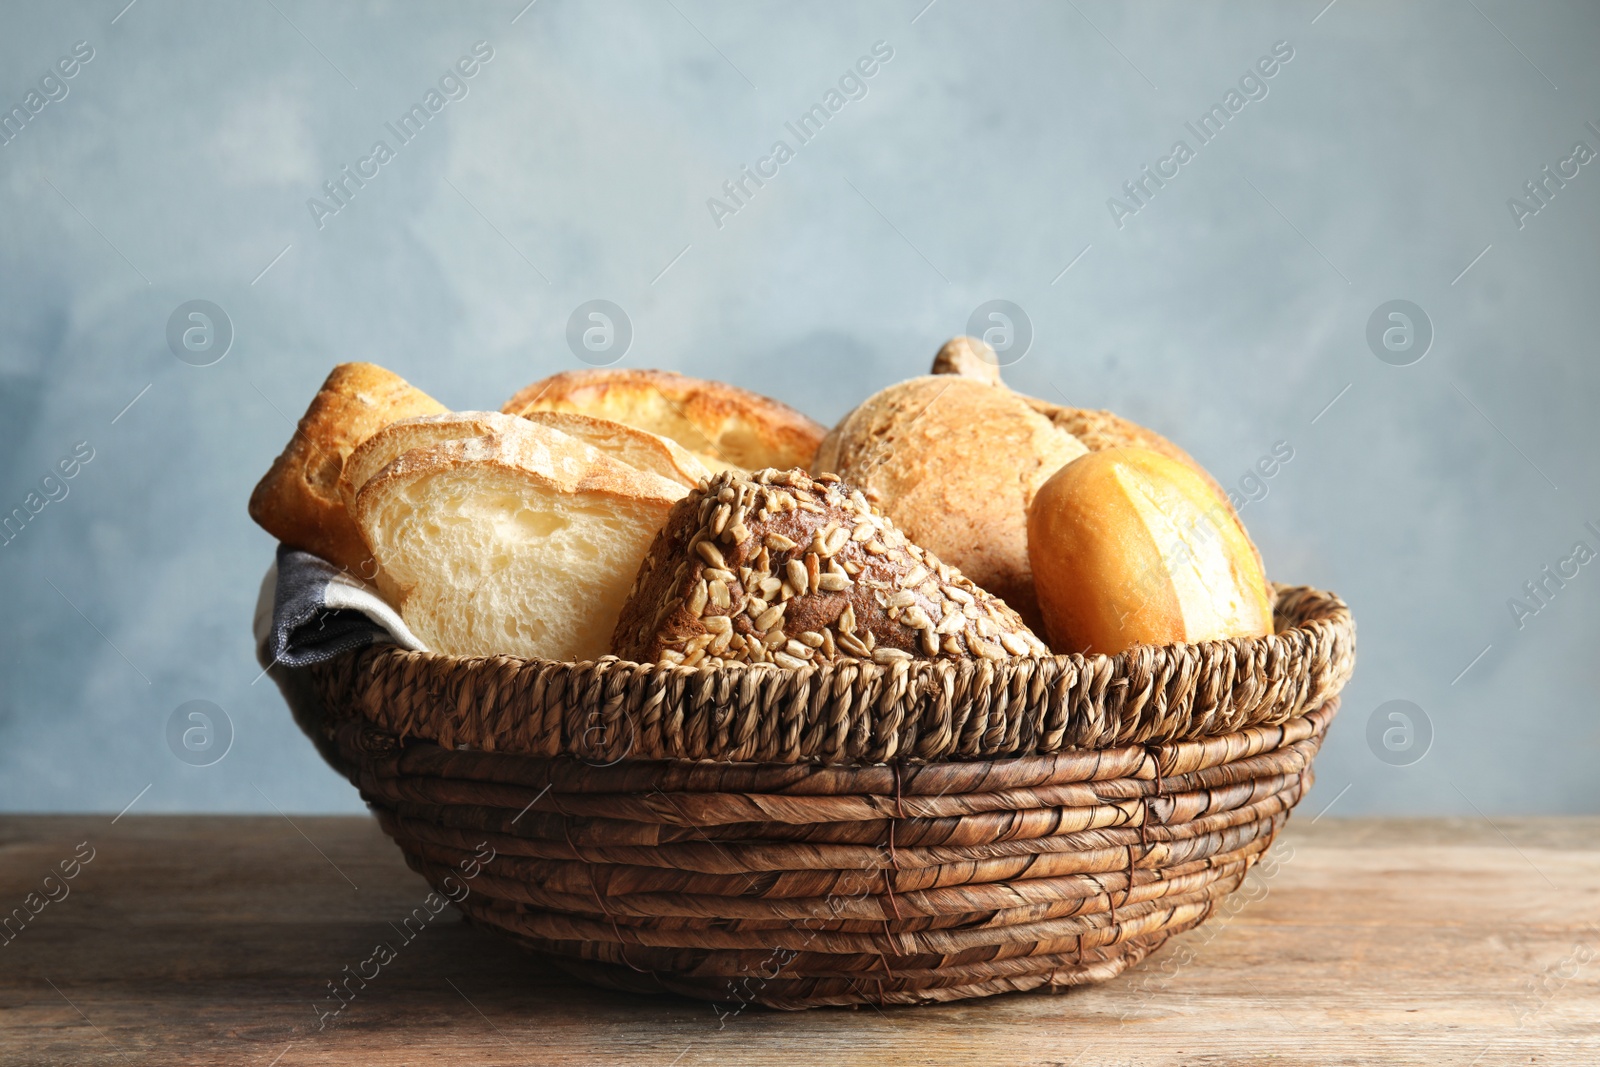 Photo of Basket with fresh bread on table against color background